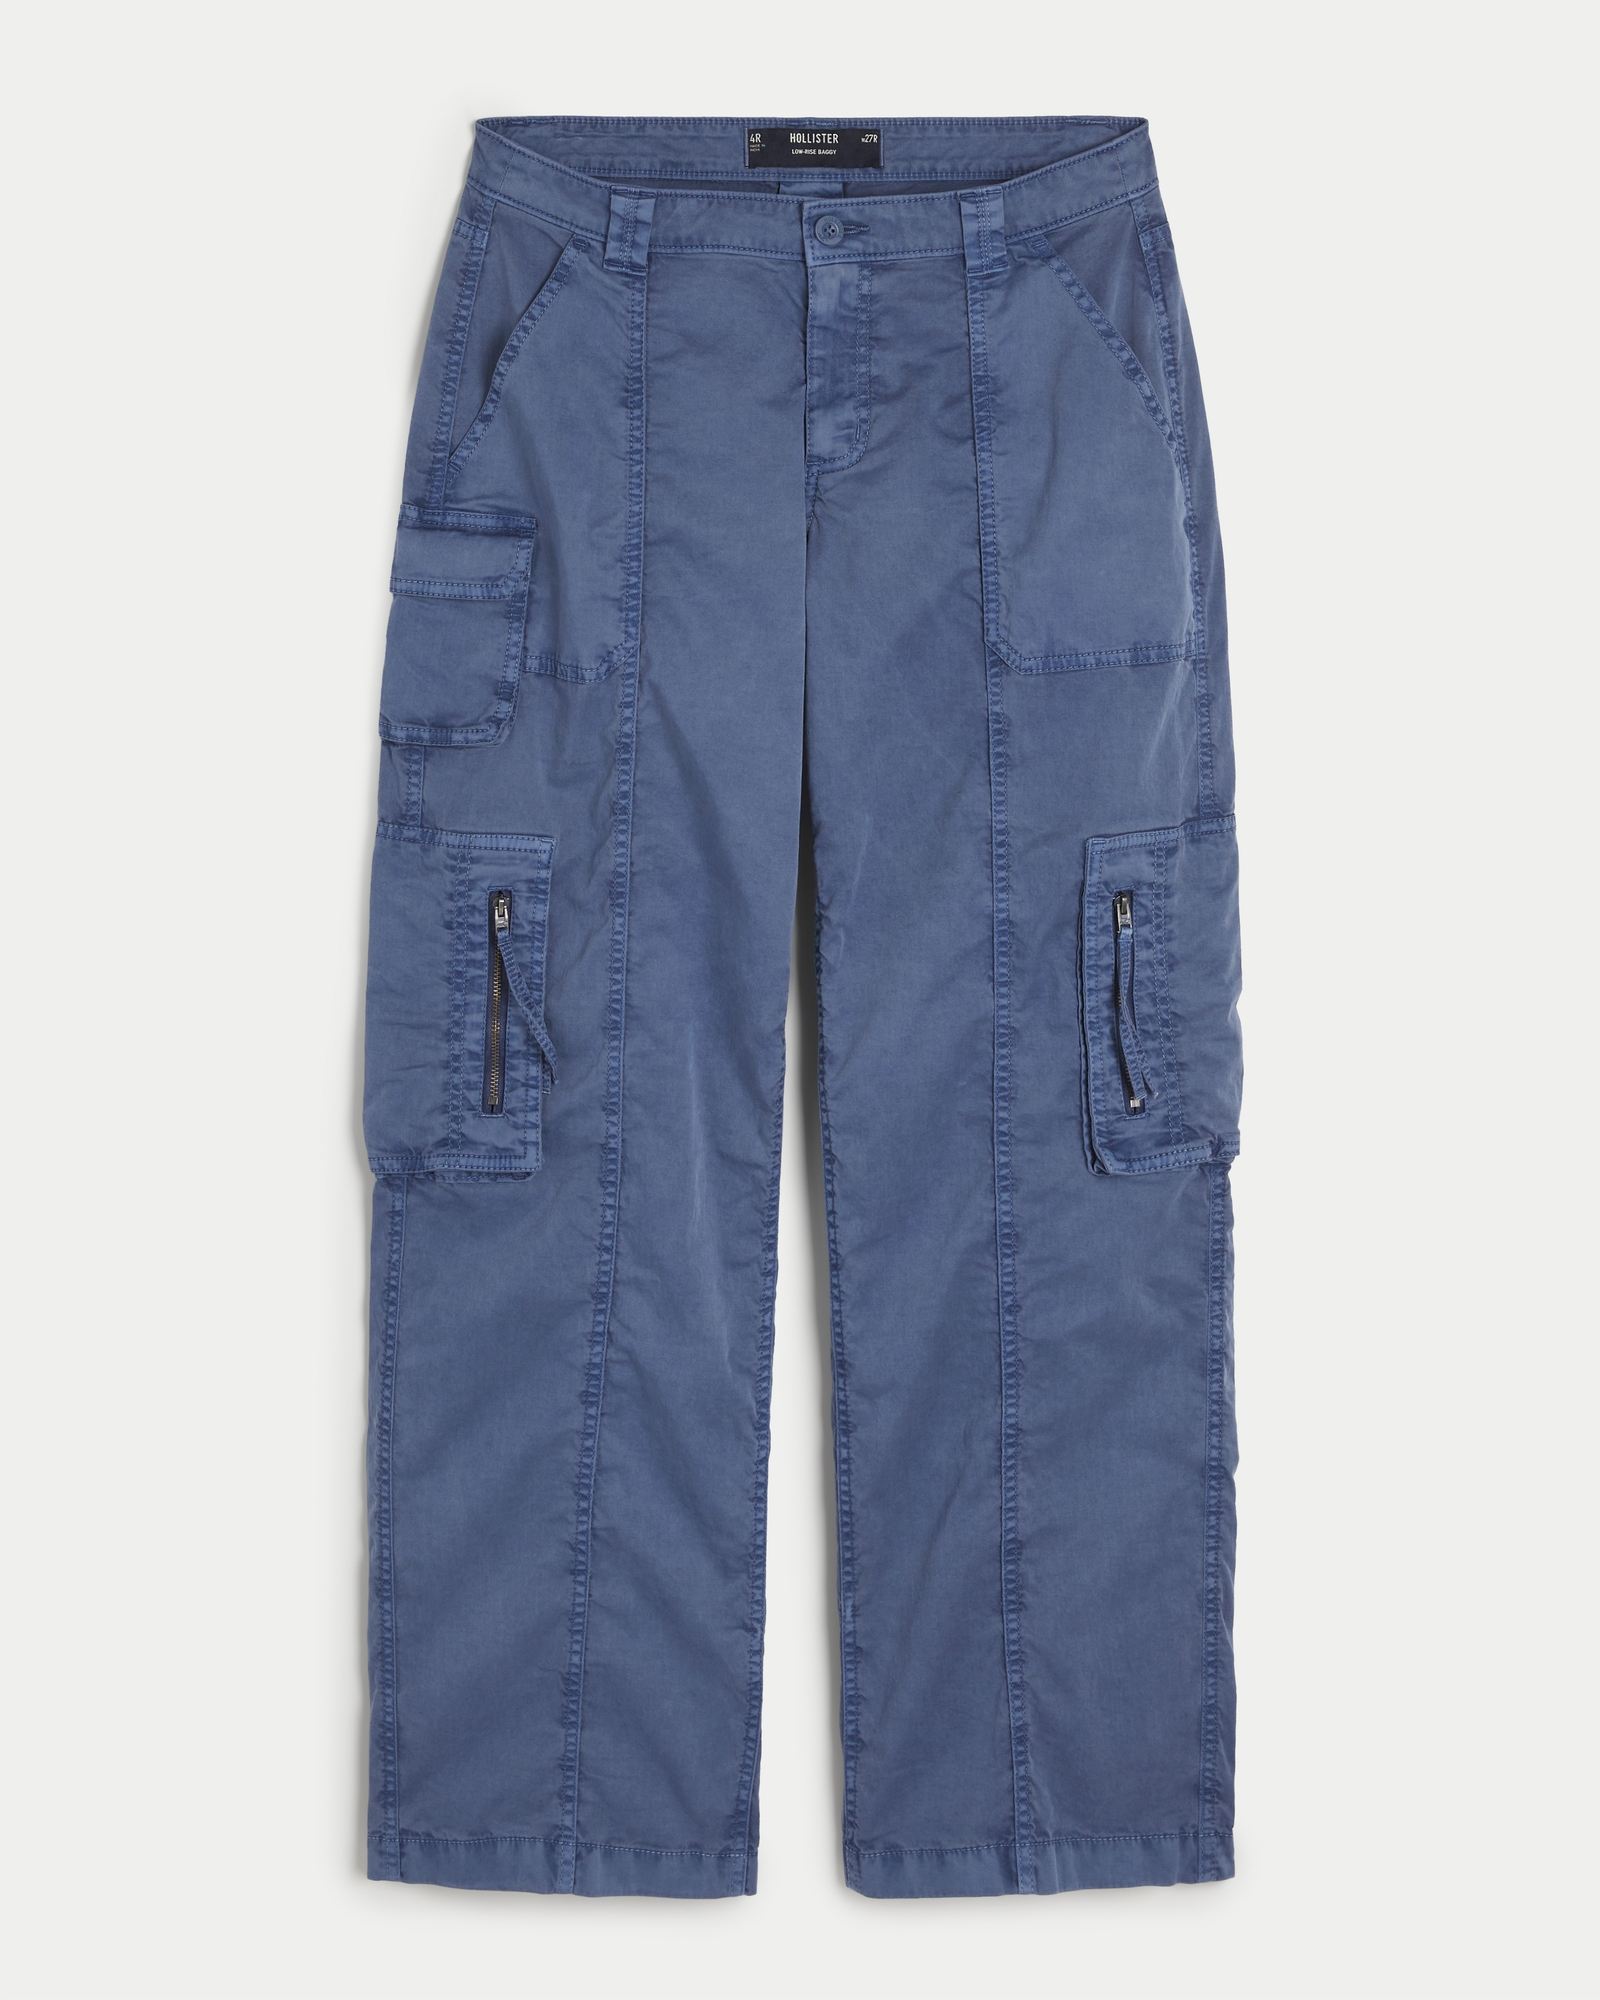 https://img.hollisterco.com/is/image/anf/KIC_356-3126-0104-201_prod1.jpg?policy=product-extra-large